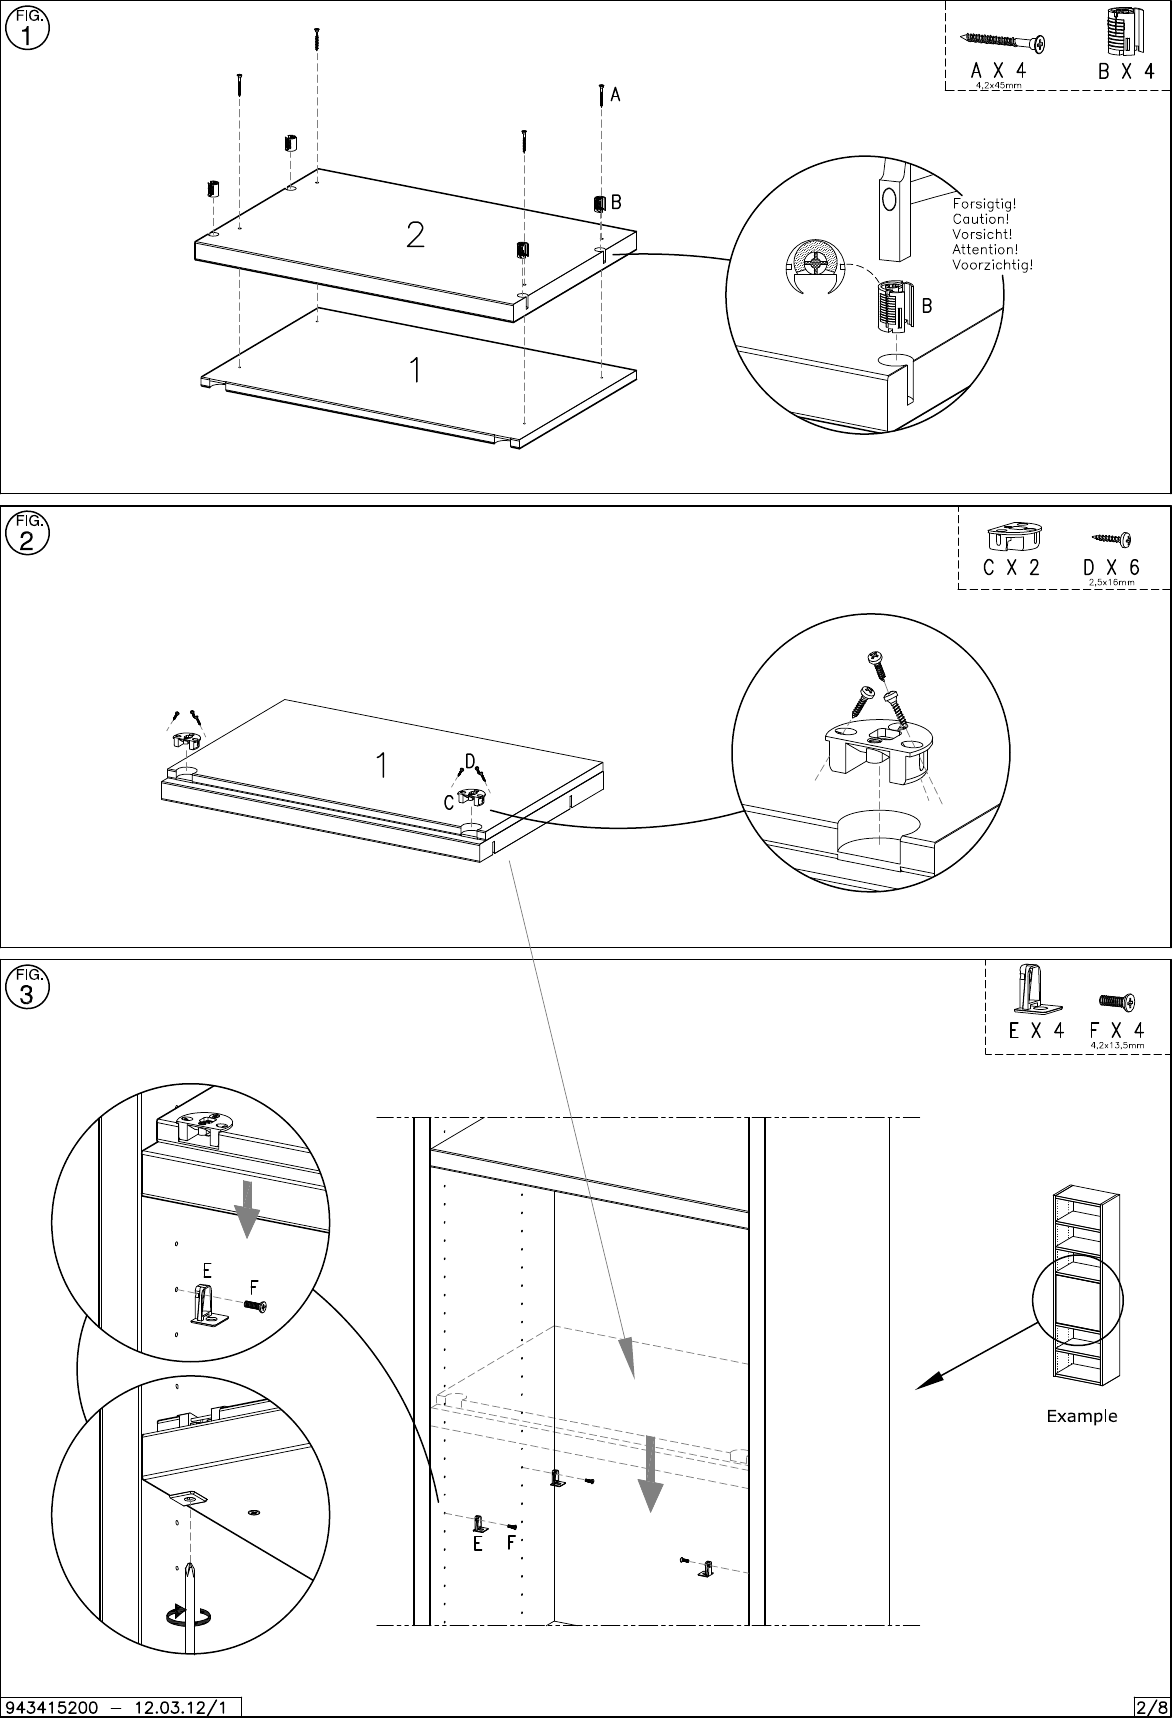 Page 2 of 8 - Boconcept Boconcept--5200-Assembly-Instruction B:\DK_PTA_Share\Inventor Ation\341 Lecco\Lecco 5200\Assembly Instruction\943415200_v1_10